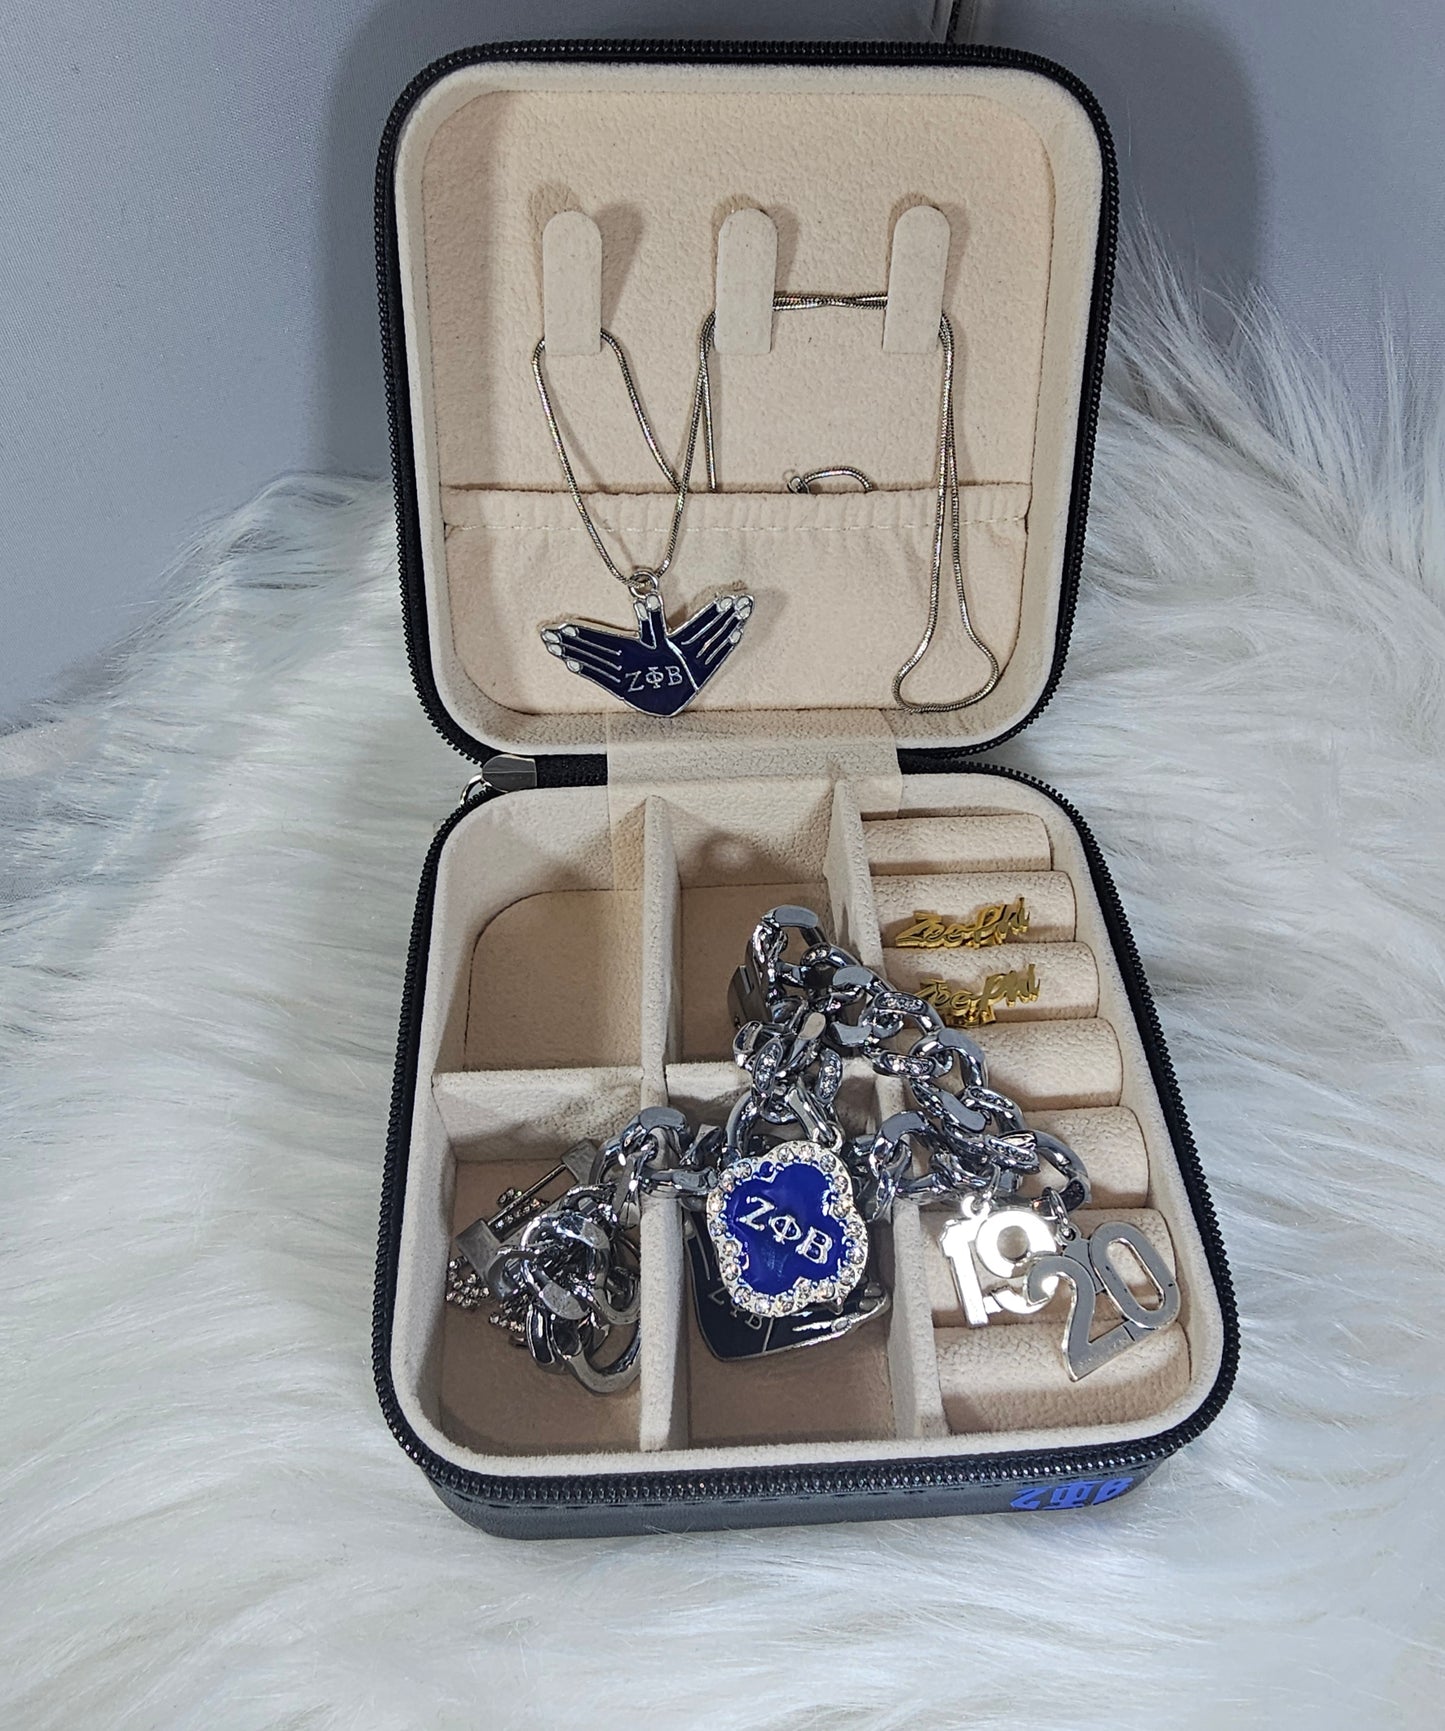 Zeta Phi Beta Jewelry Boxes Great For Traveling